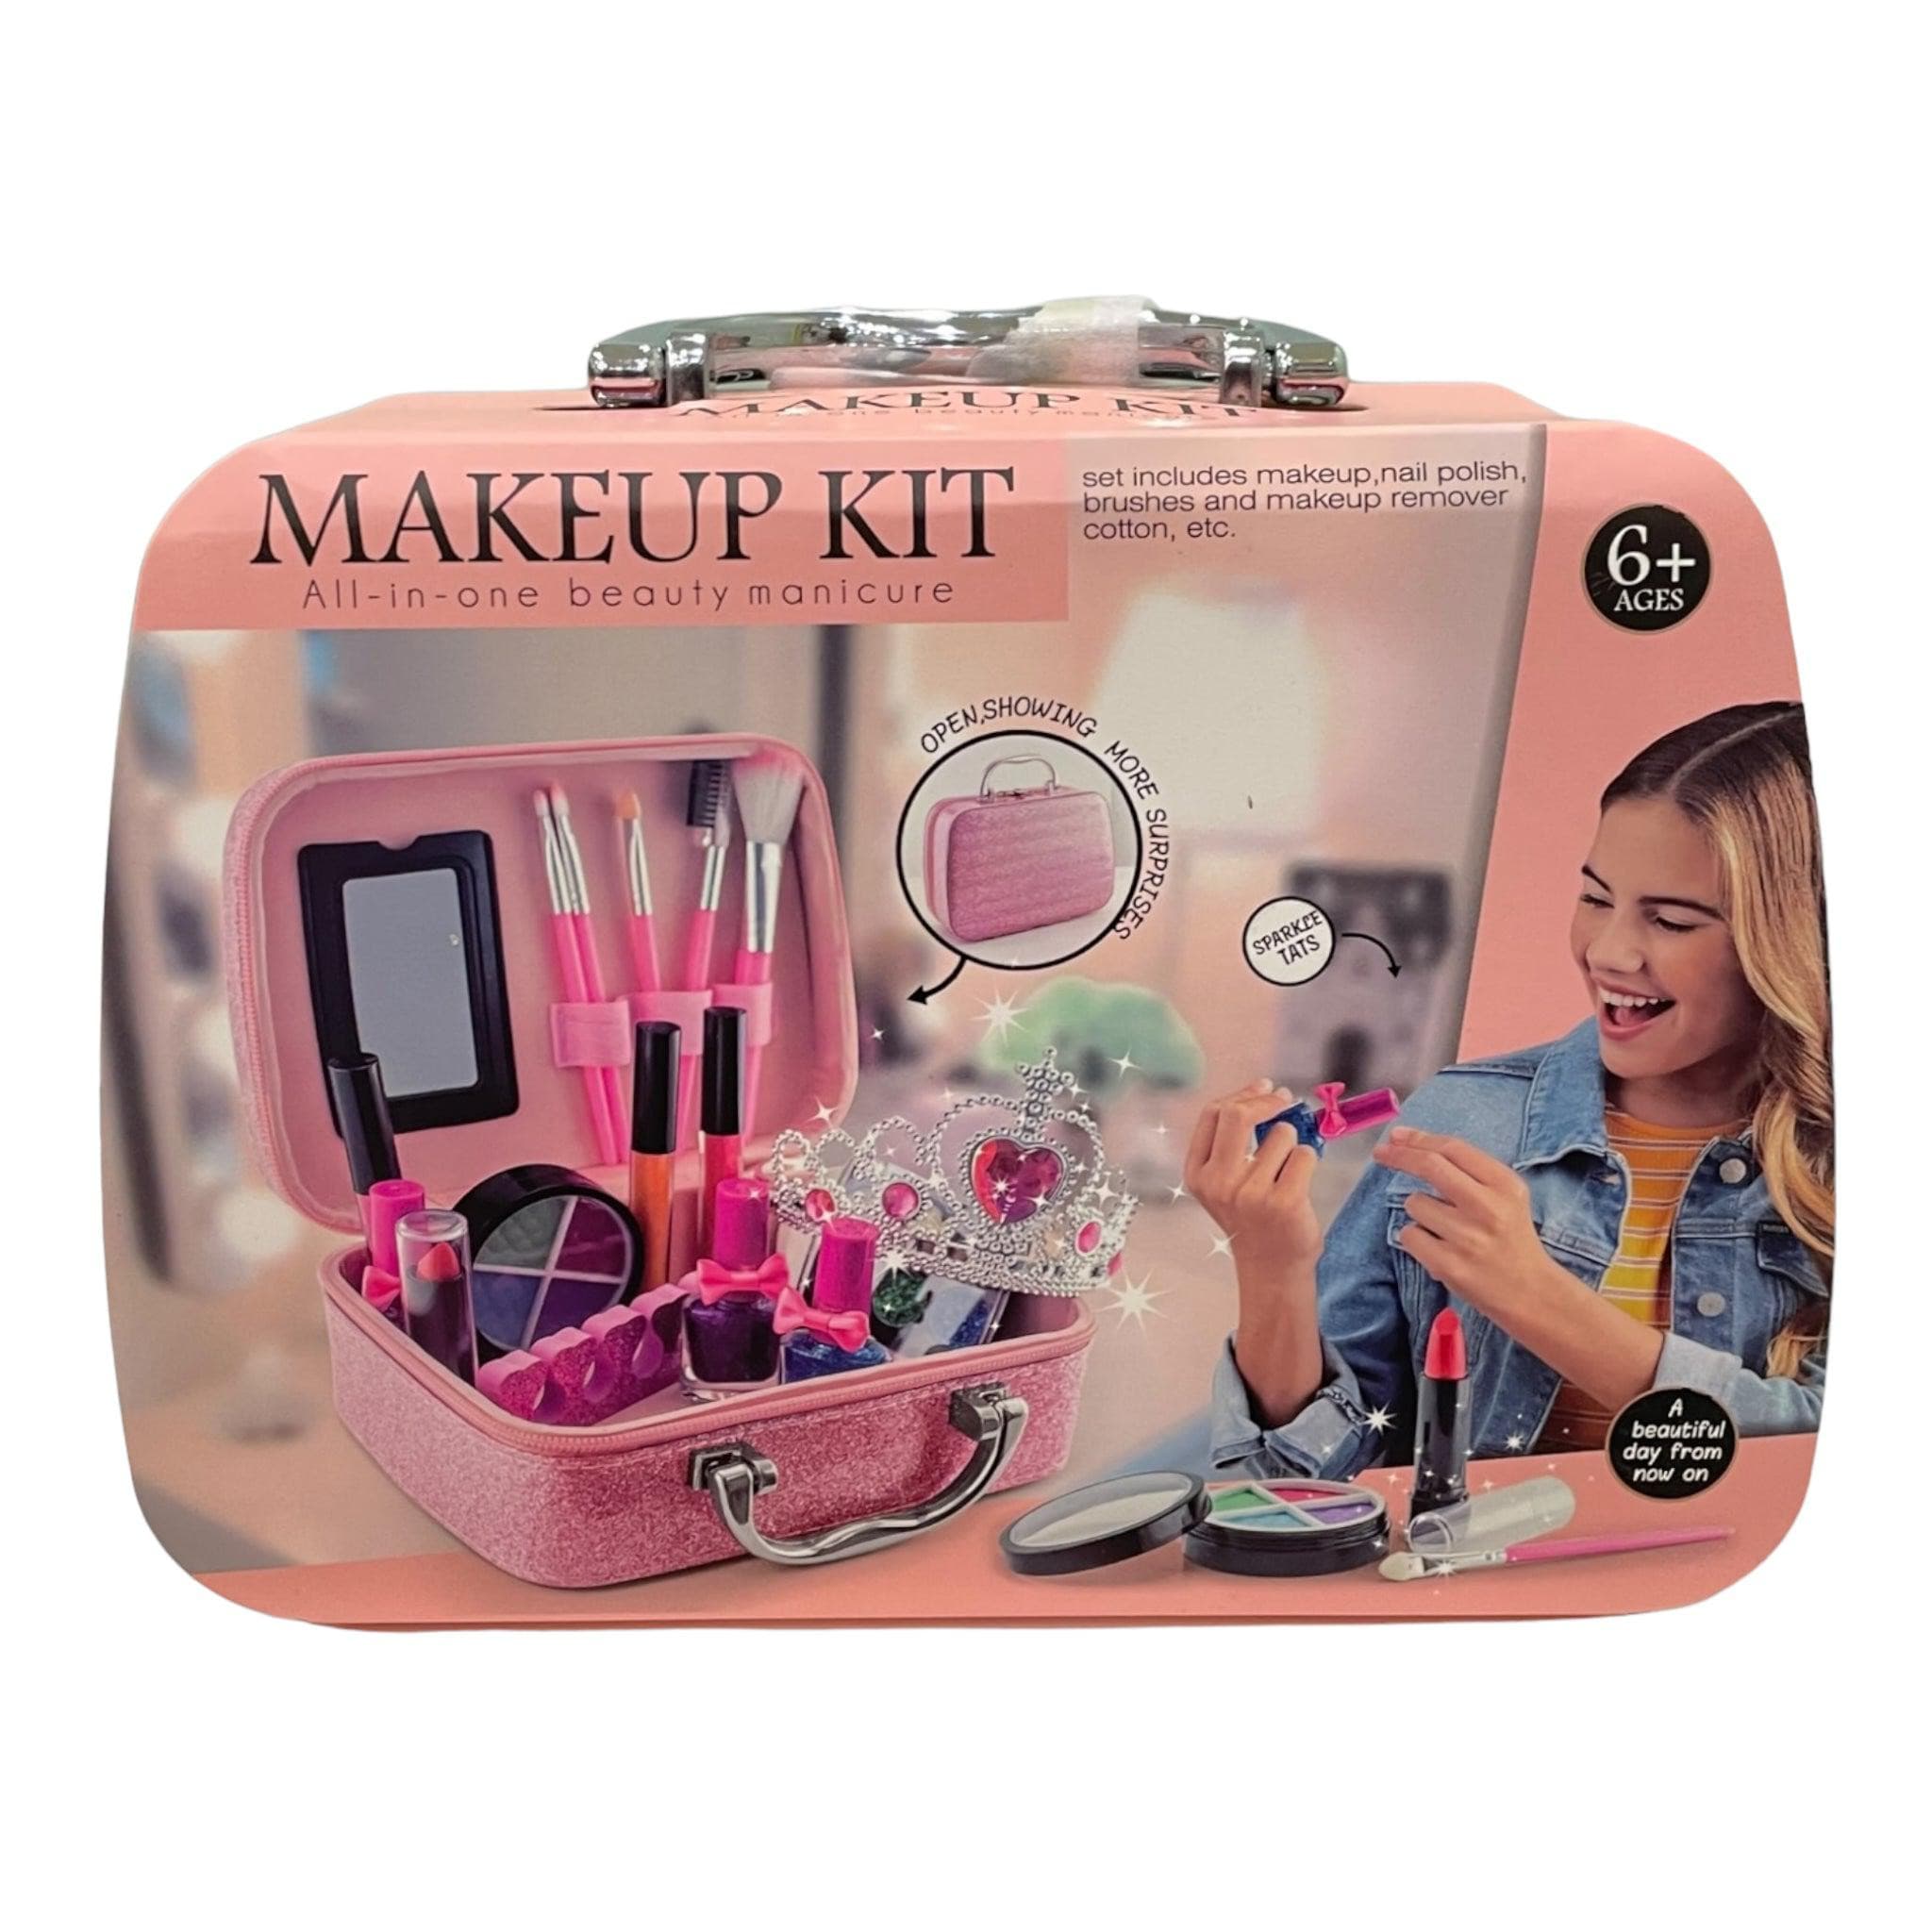 Kids Makeup All-In-One Beauty Children's Manicure Kit